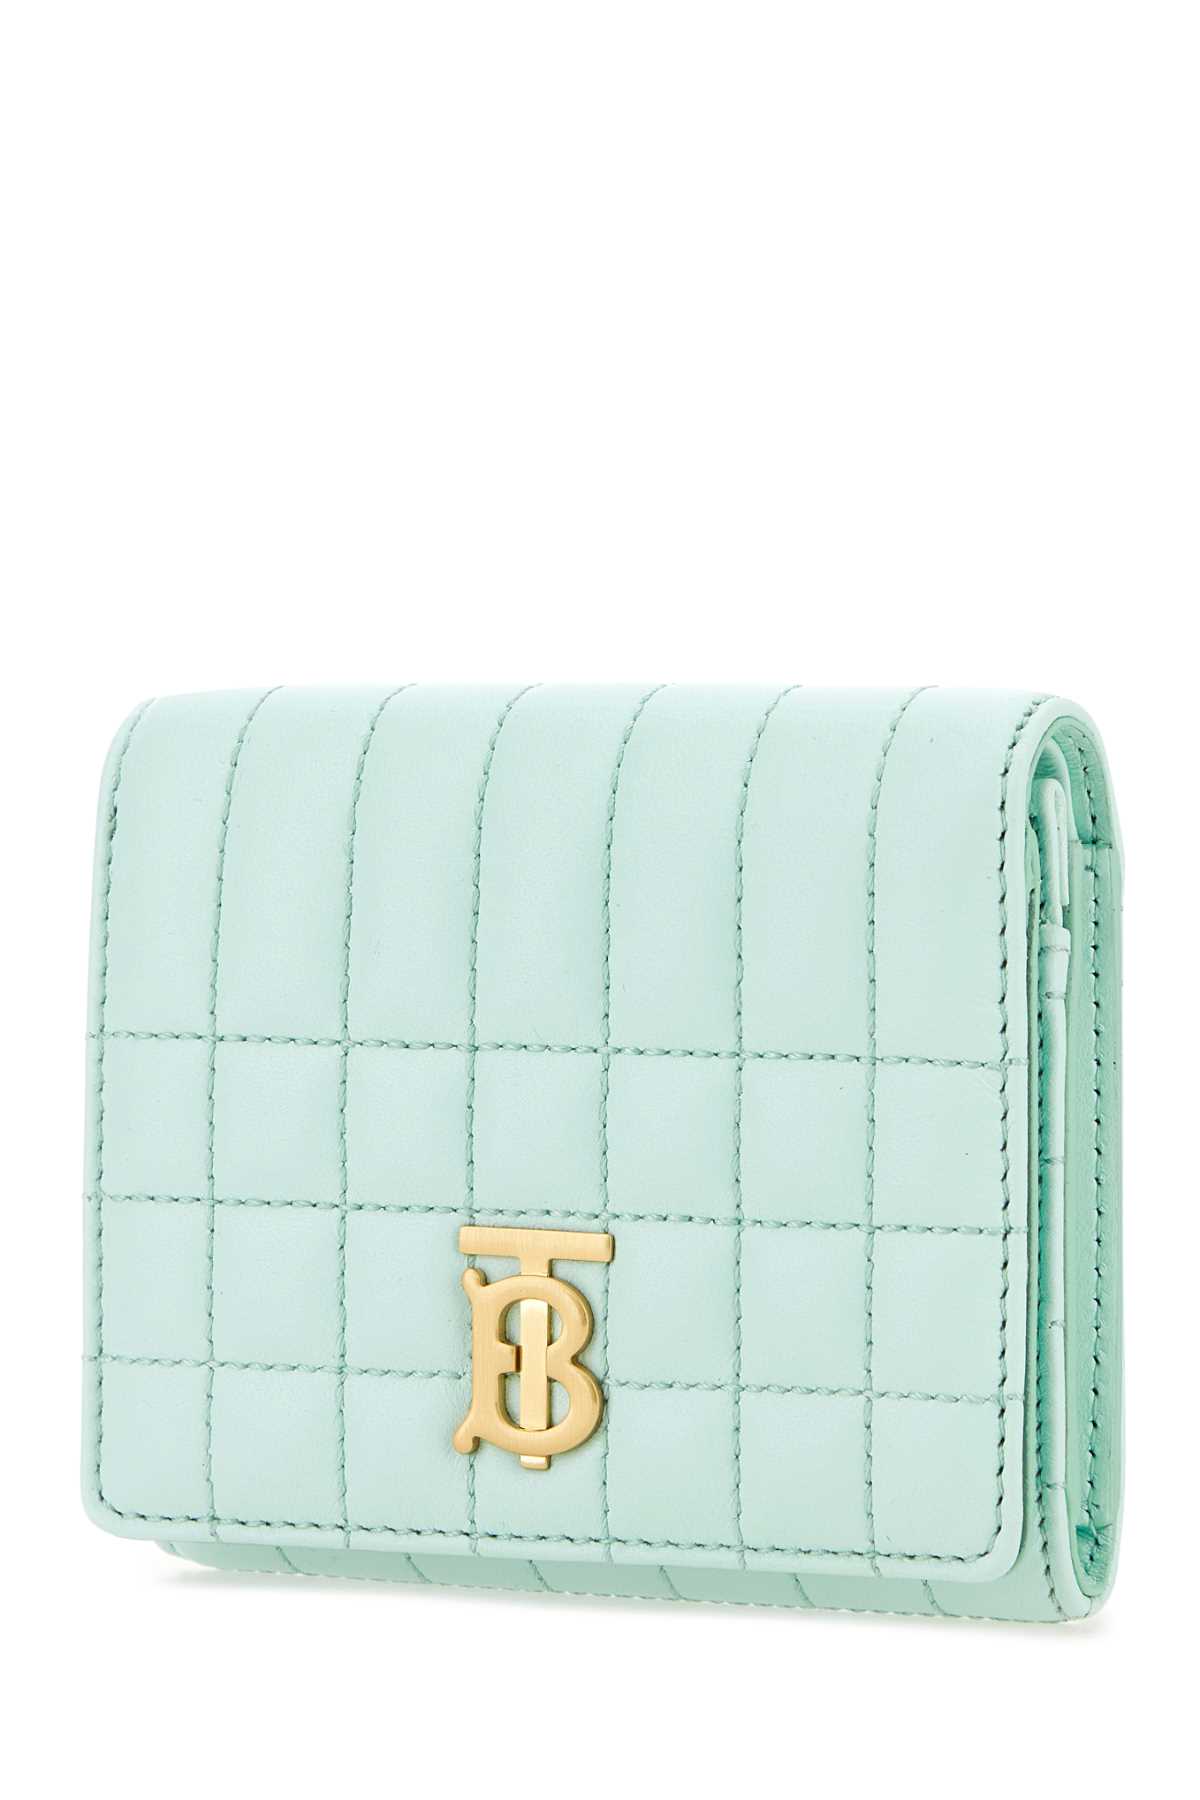 Burberry Pastel Light-blue Nappa Leather Small Lola Wallet In Coolmint